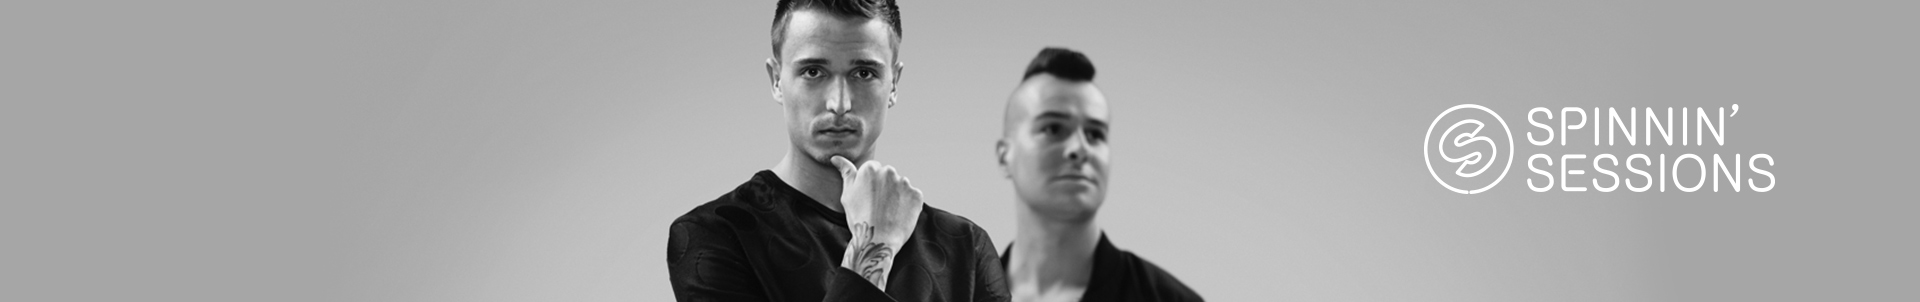 Check out Spinnin' Sessions with Blasterjaxx